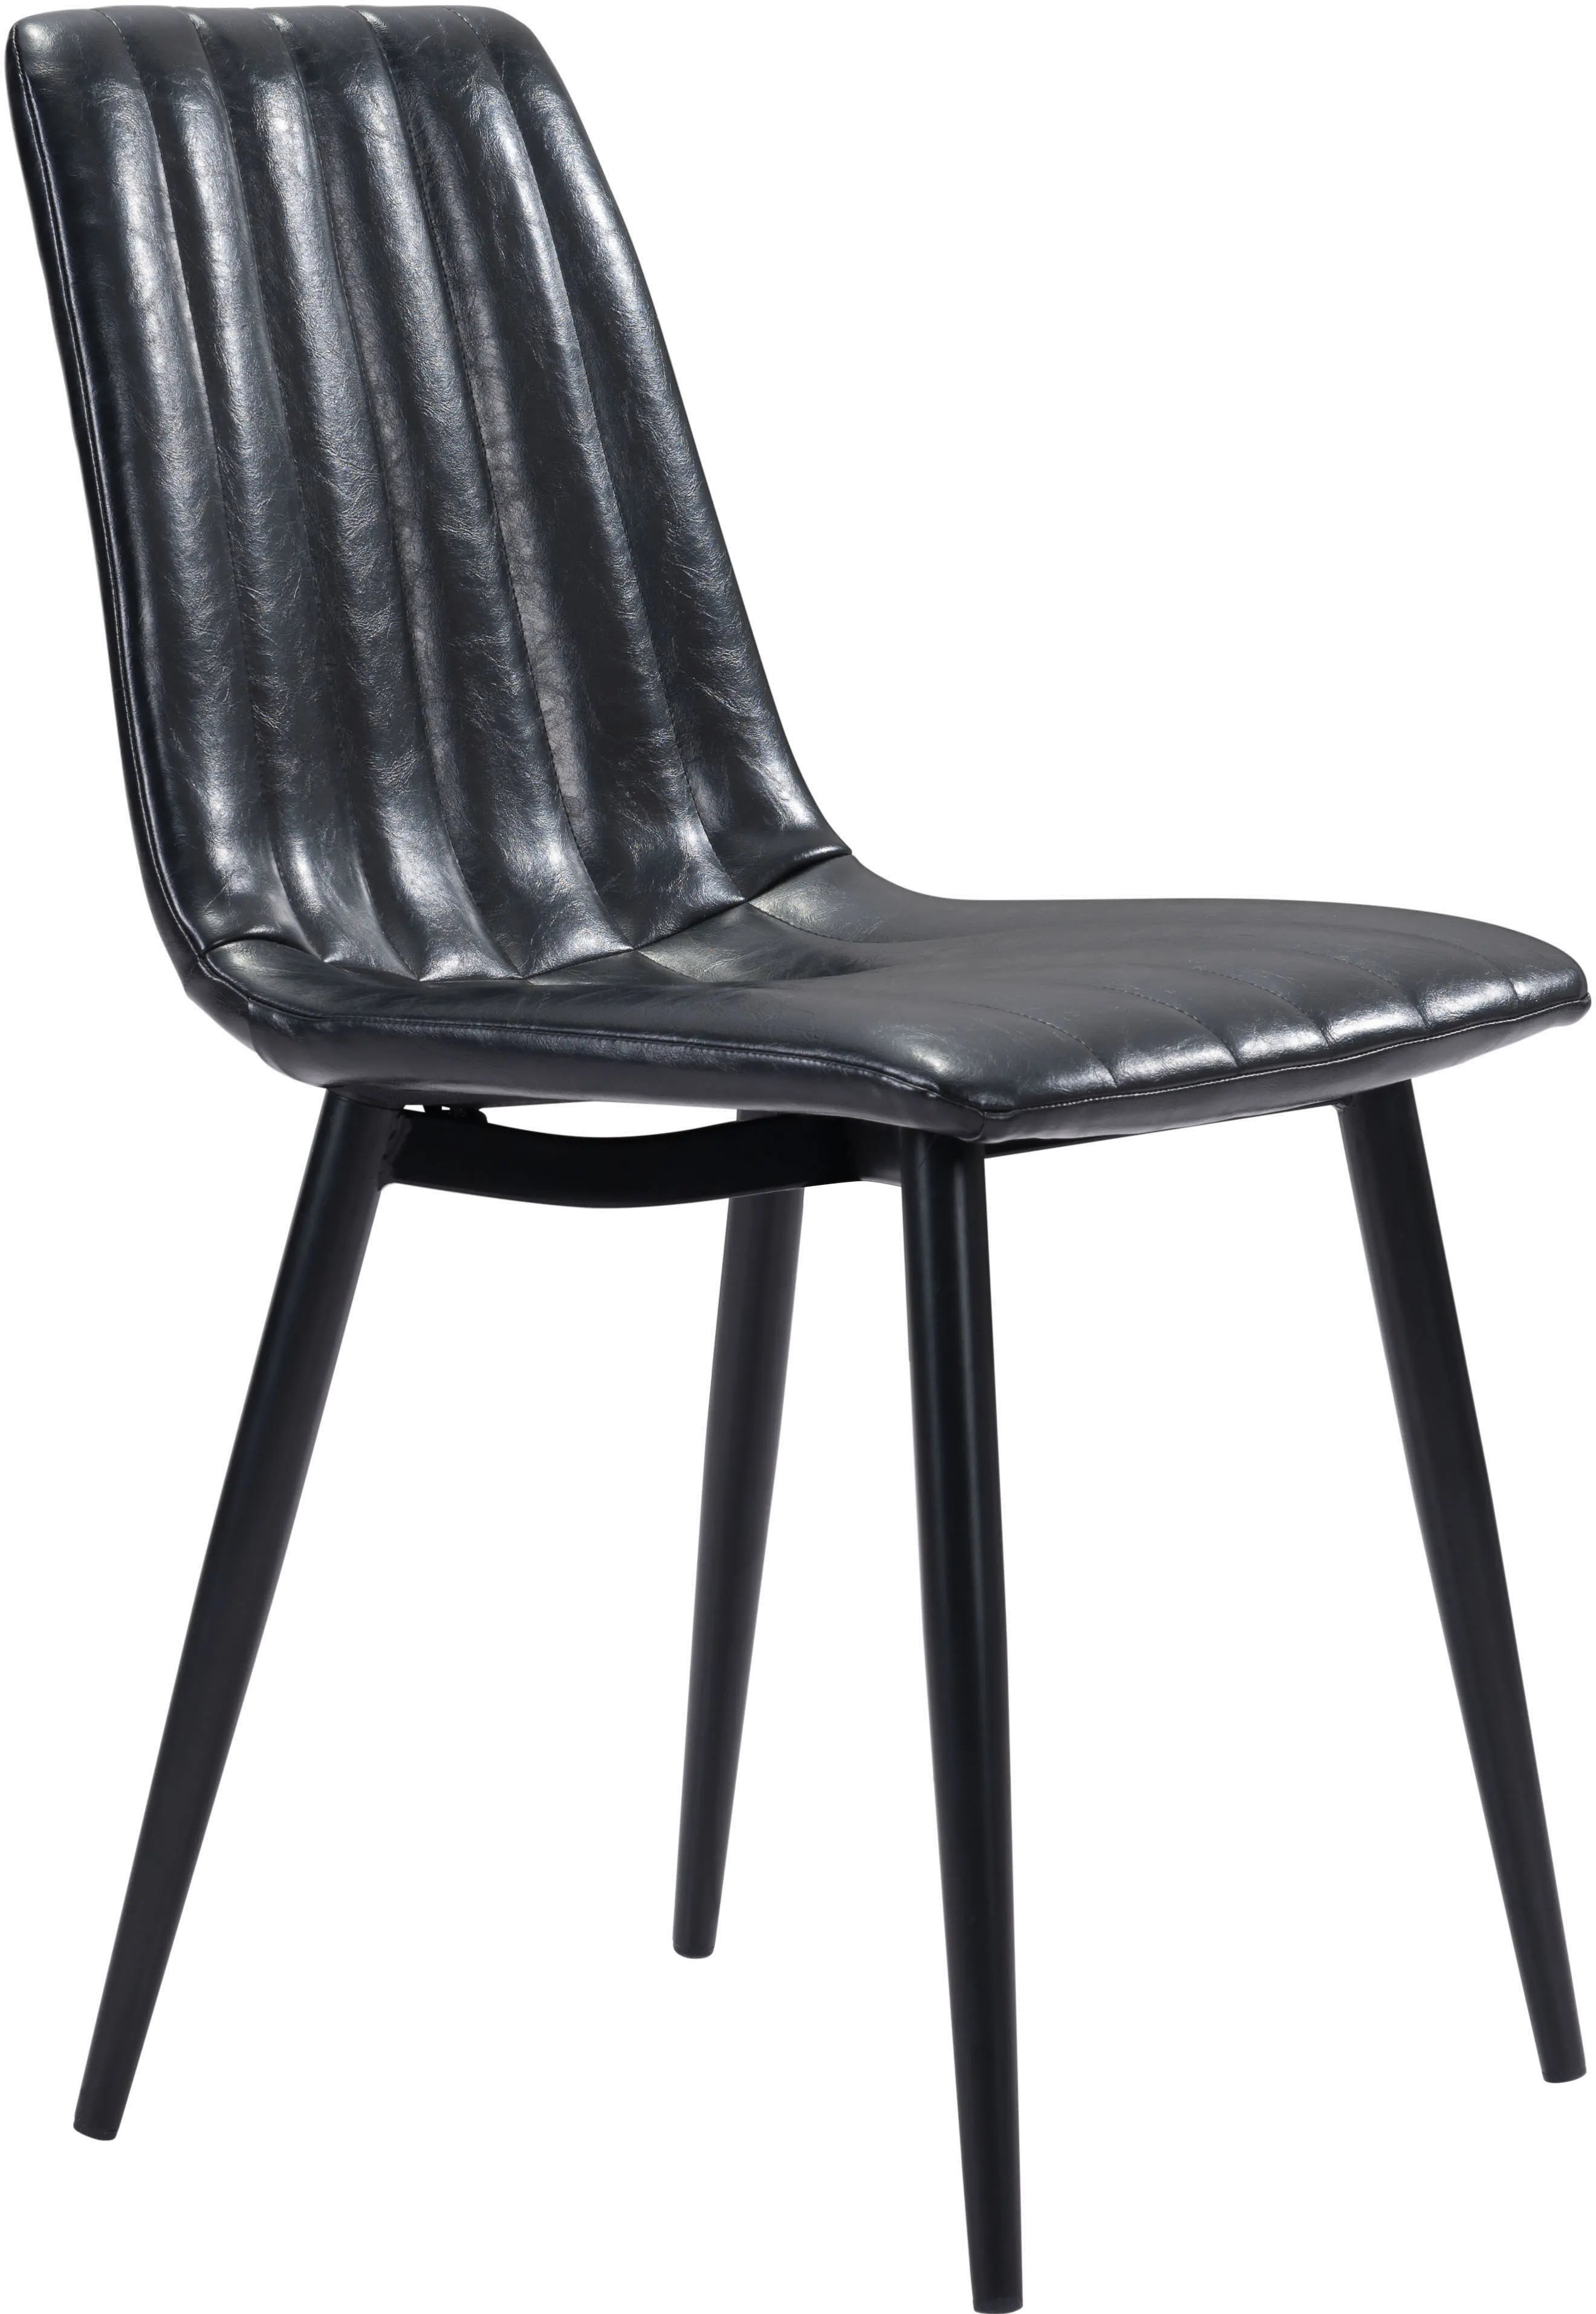 Black Dining Room Chair (Set of 2) - Dolce